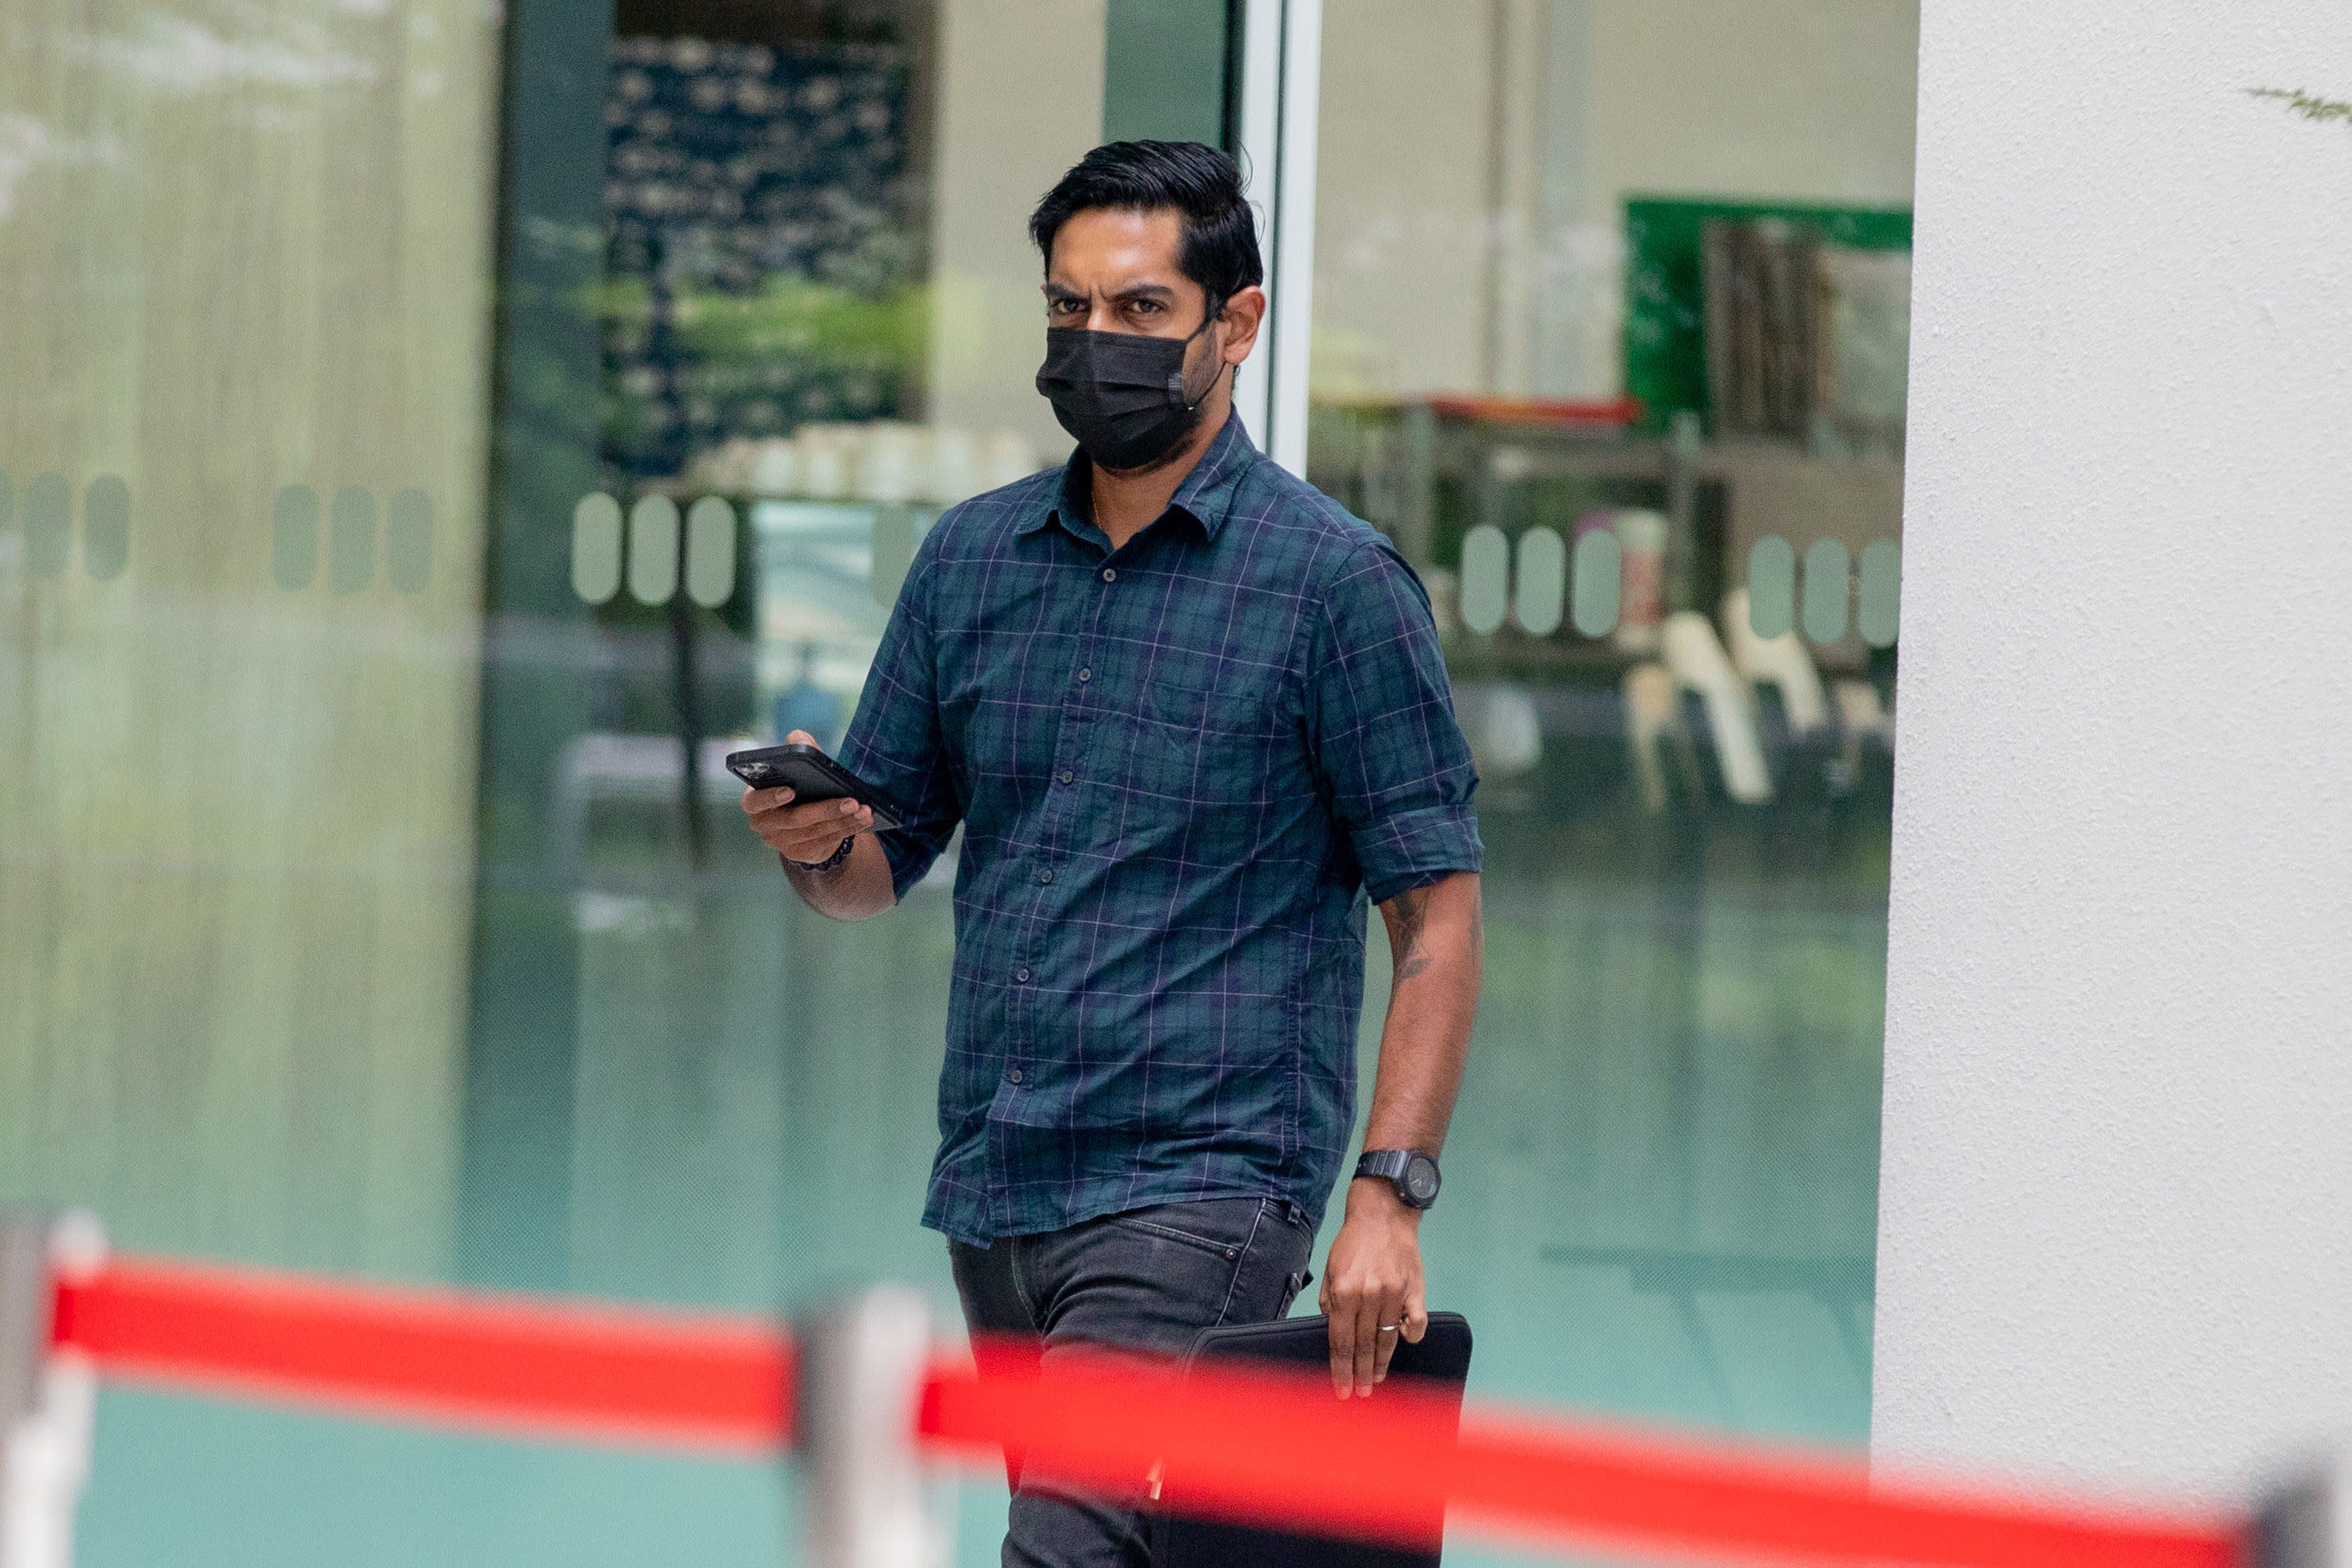 Sanjiv Kumar Sivaraj arriving at the State Courts on Jan 26, 2022. The 32-year-old was fined S$3,000 for verbally abusing a police officer.